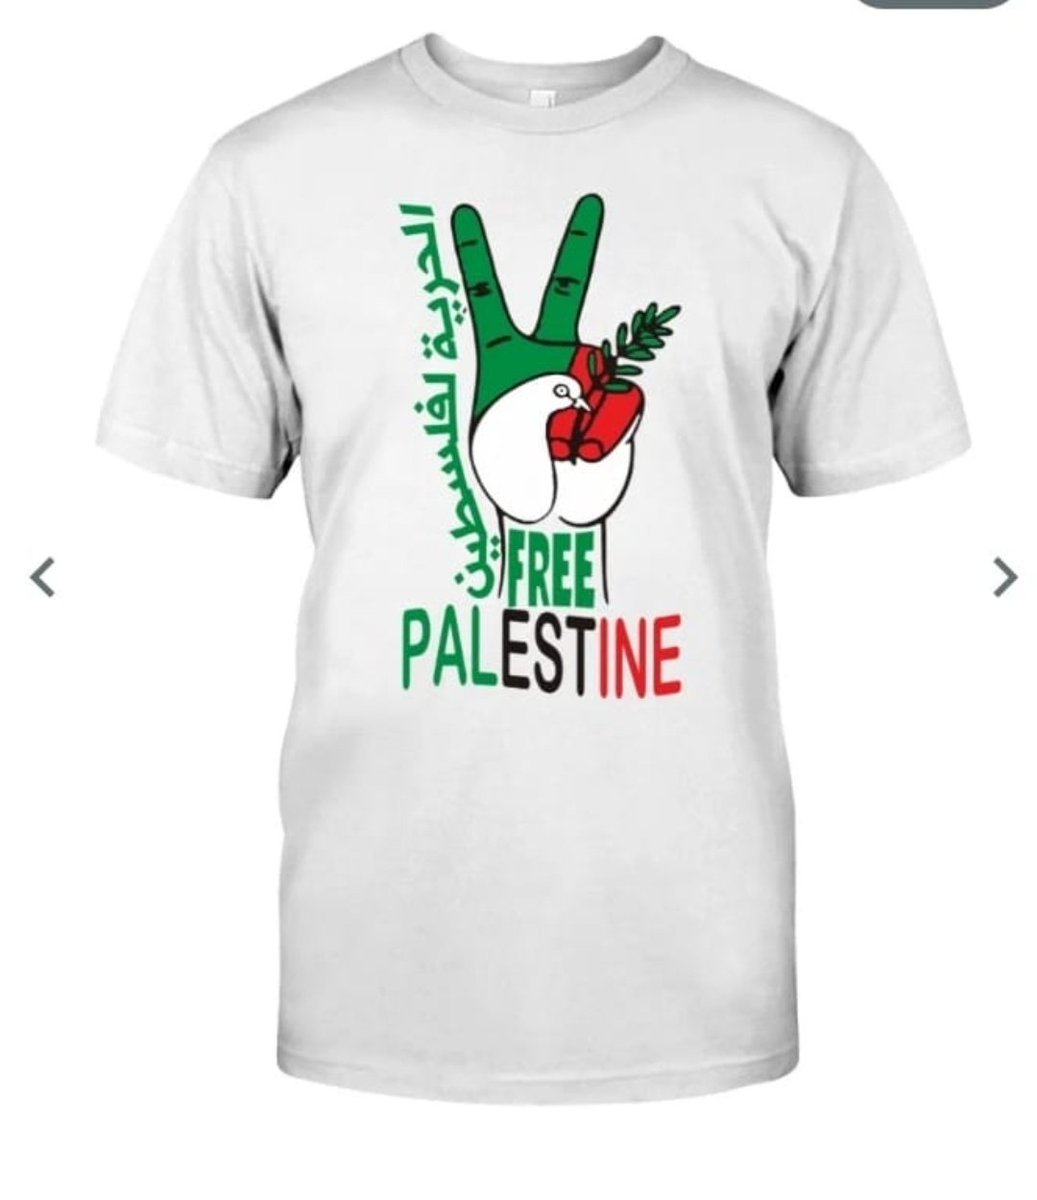 The proceeds of our store will go to poor and sick Palestinian families Show your solidarity and support via the link🙏🇵🇸 bit.ly/RahChaSu